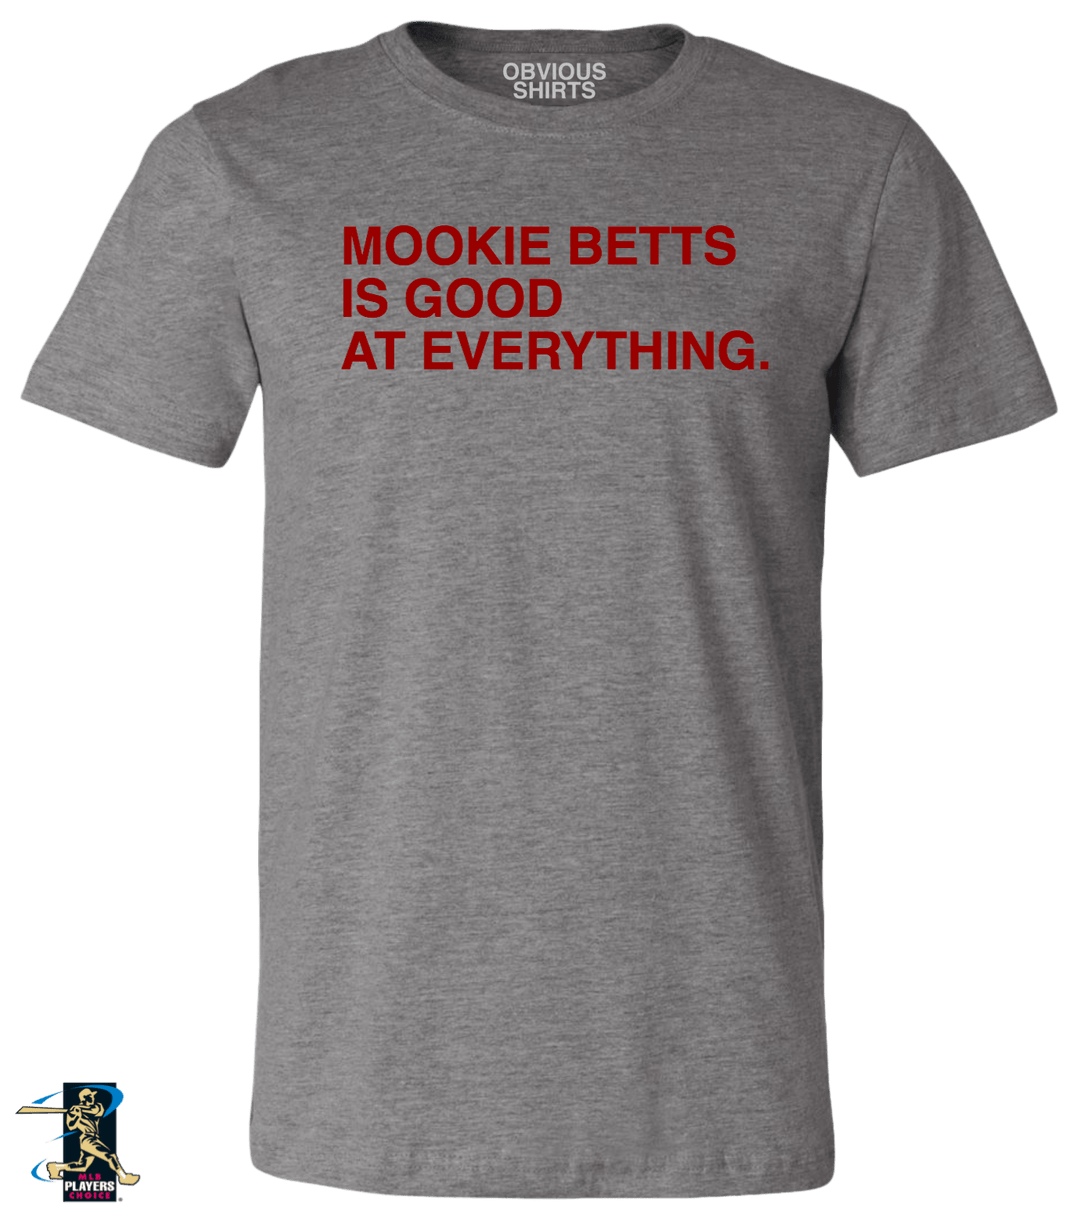 MOOKIE BETTS IS GOOD AT EVERYTHING. - OBVIOUS SHIRTS.